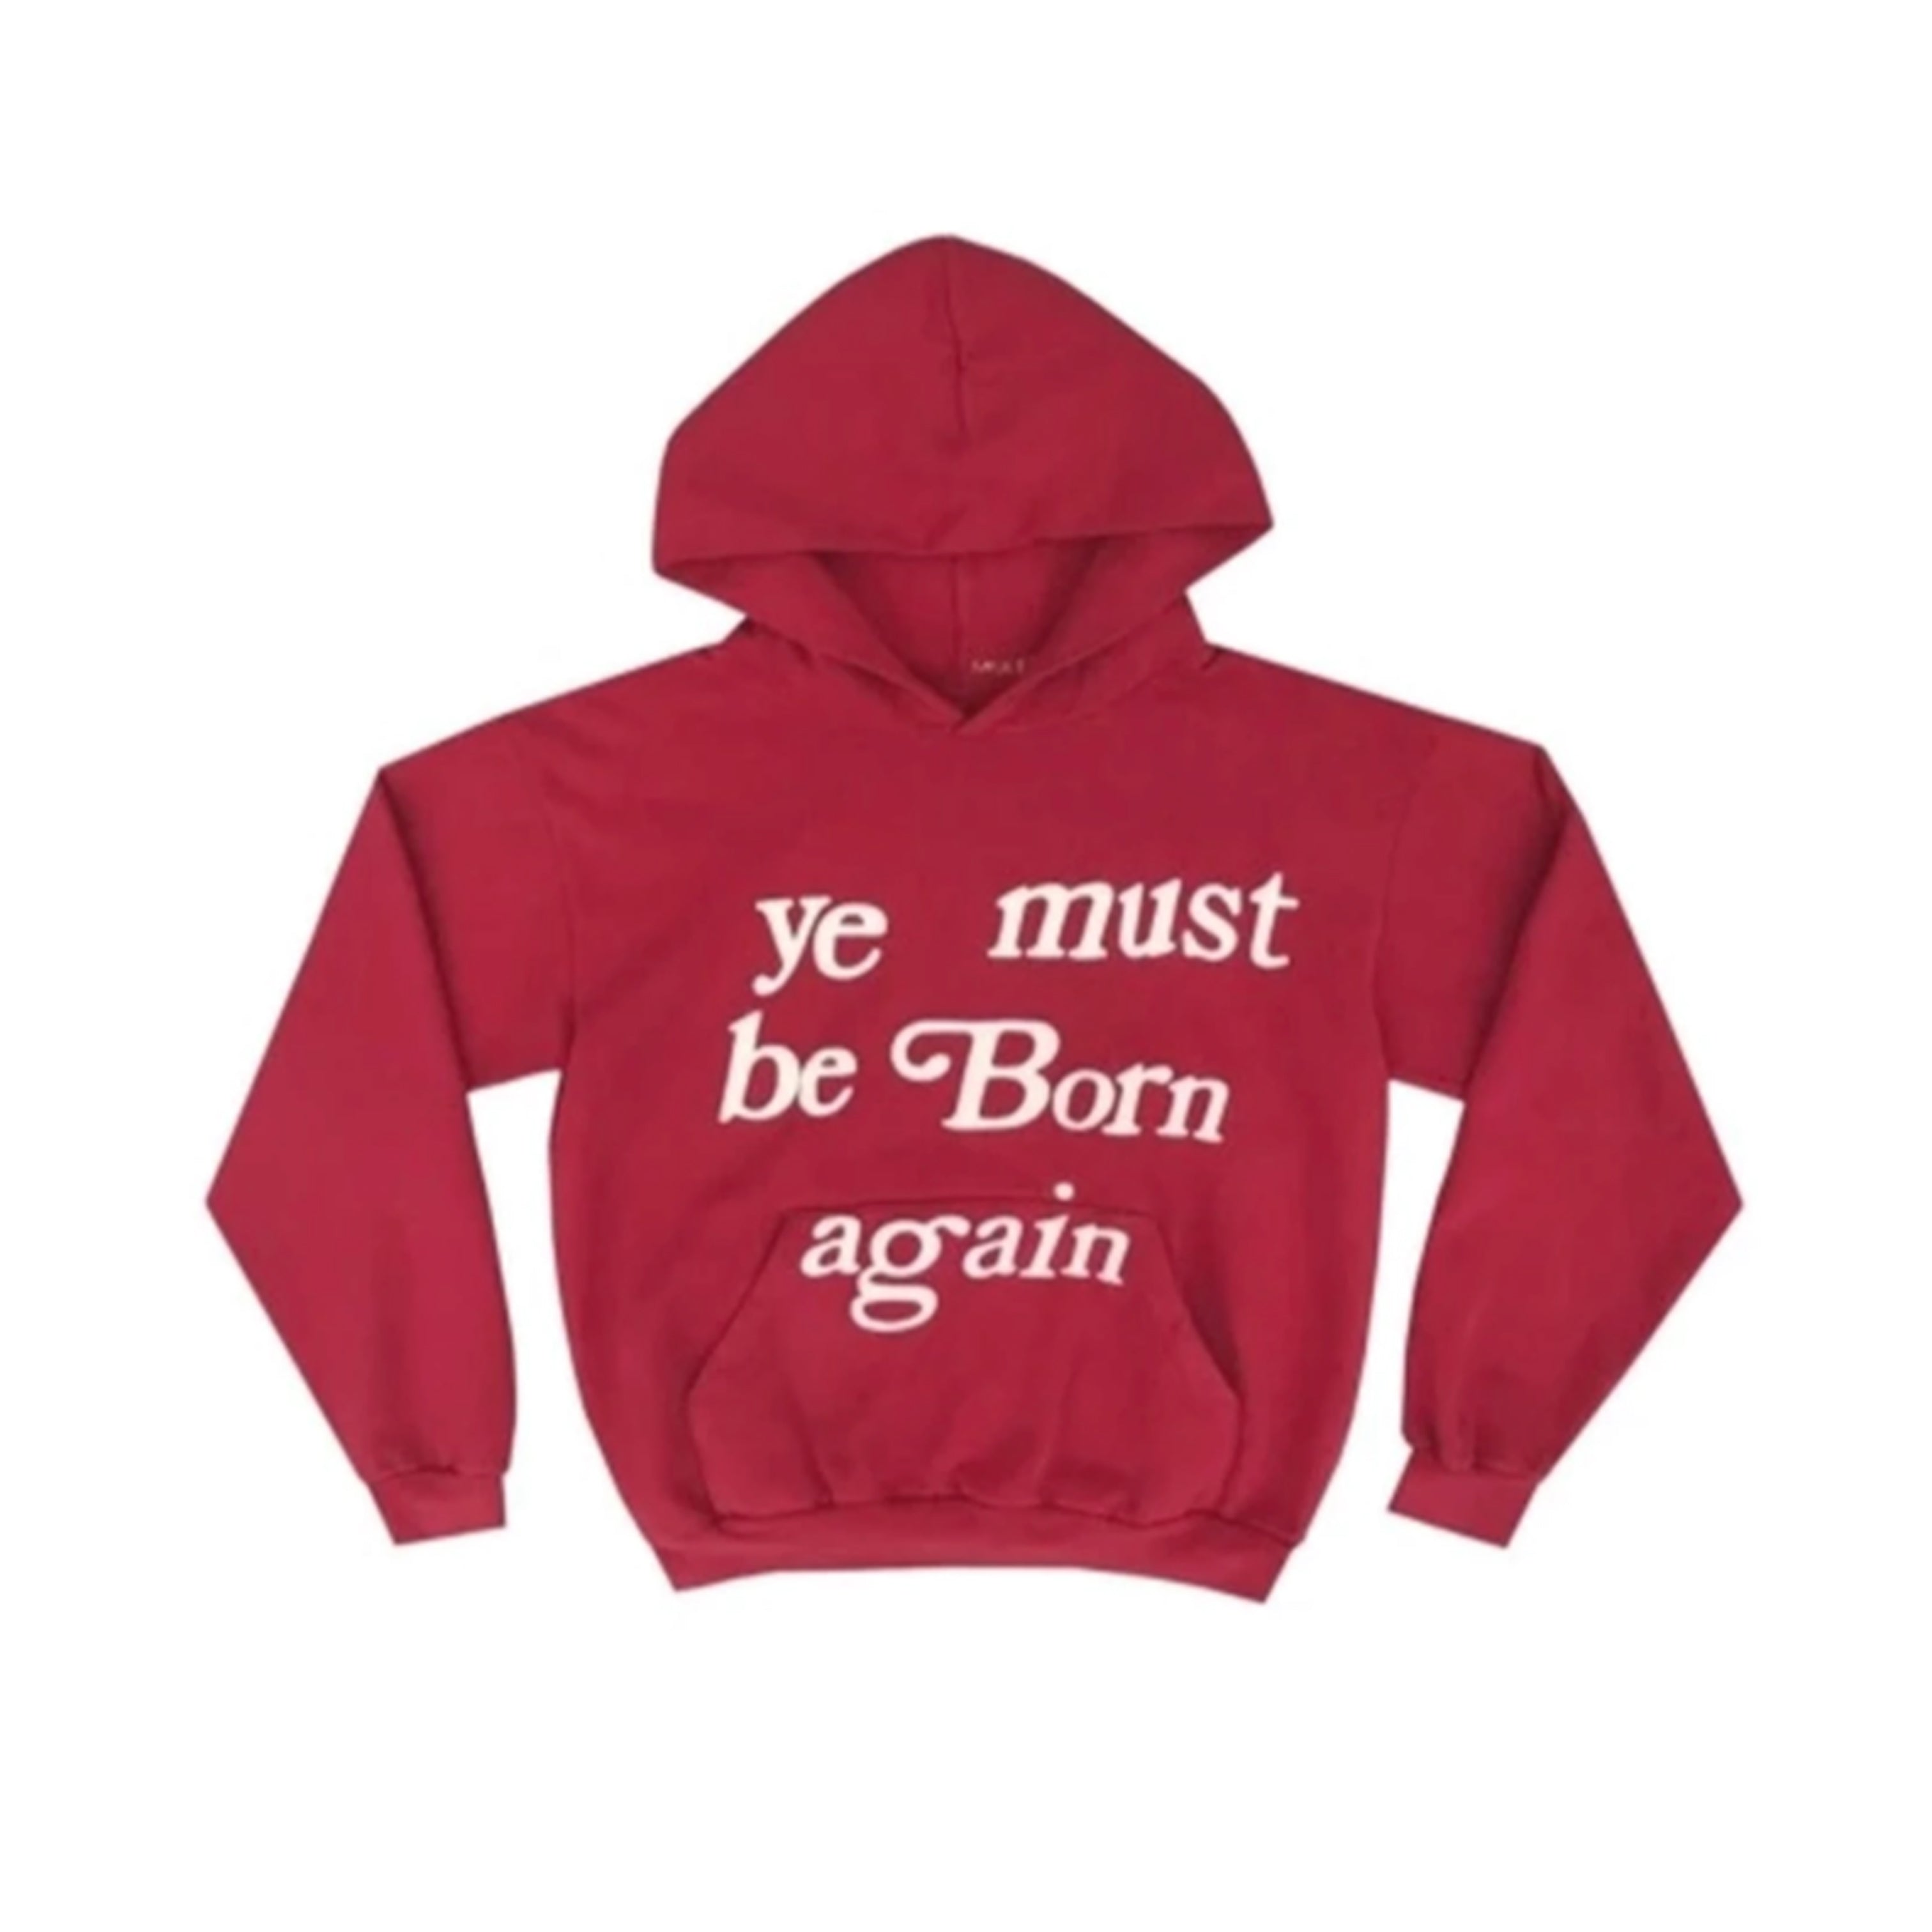 CPFM Hoodie "YE MUST BE BORN AGAIN" Red New Size M